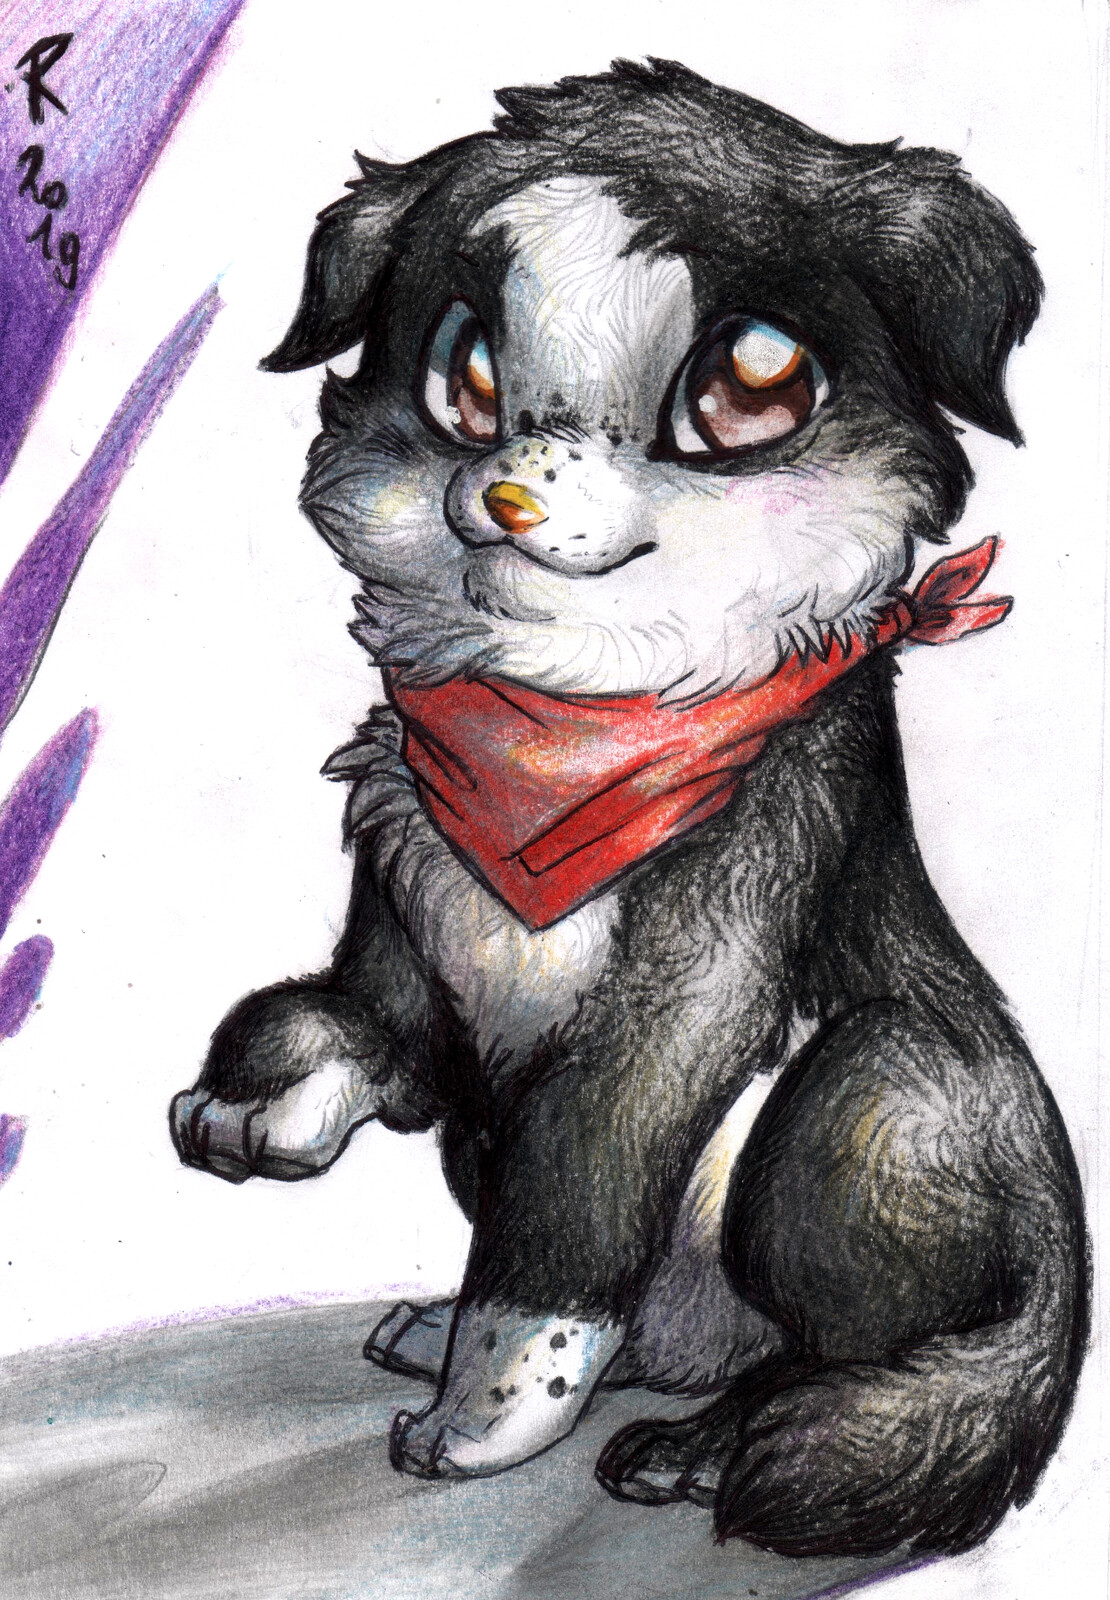 Another ArtFight attack, or better a revenge! This good boy is Muddy, a character that belongs to muddpaws. Drawn with colored pencils and pen. 